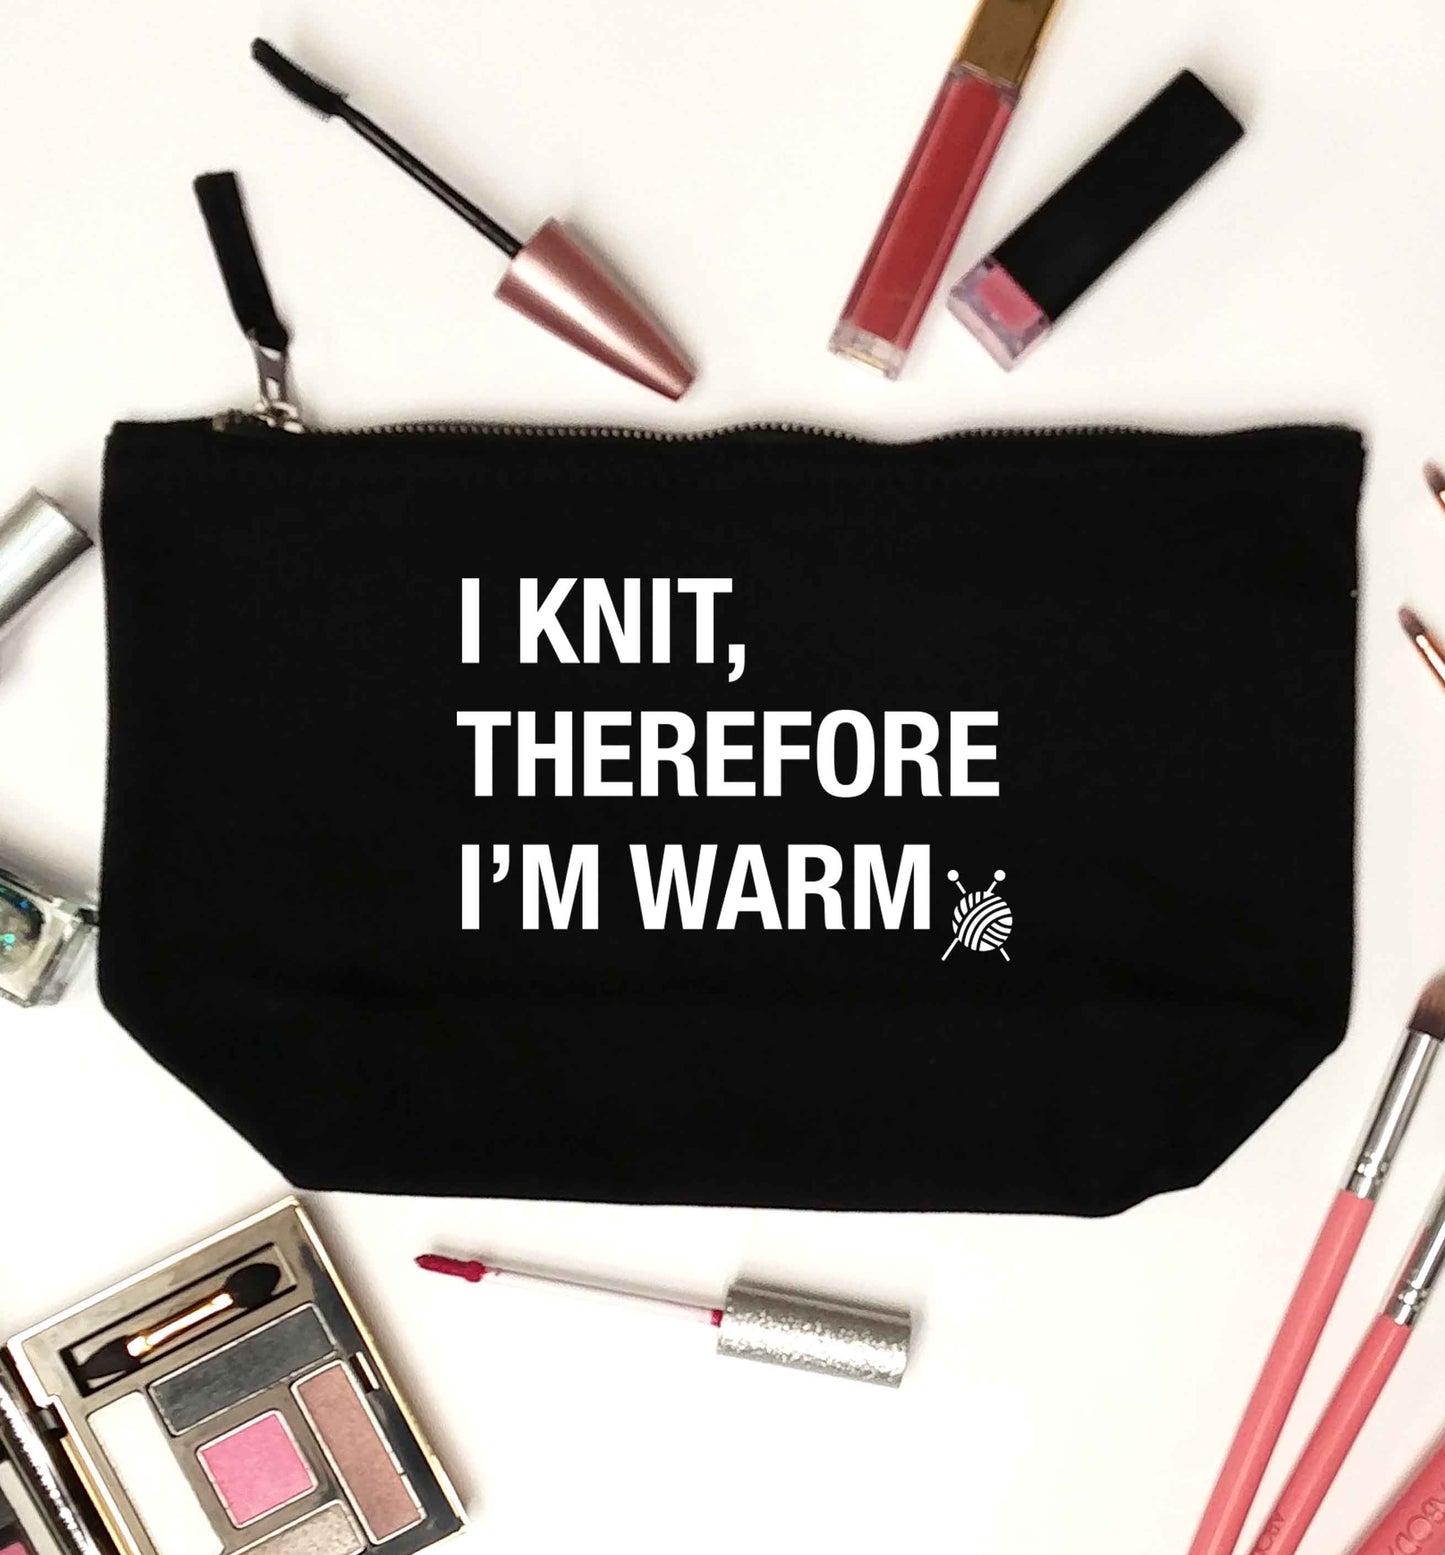 I knit therefore I'm warm black makeup bag